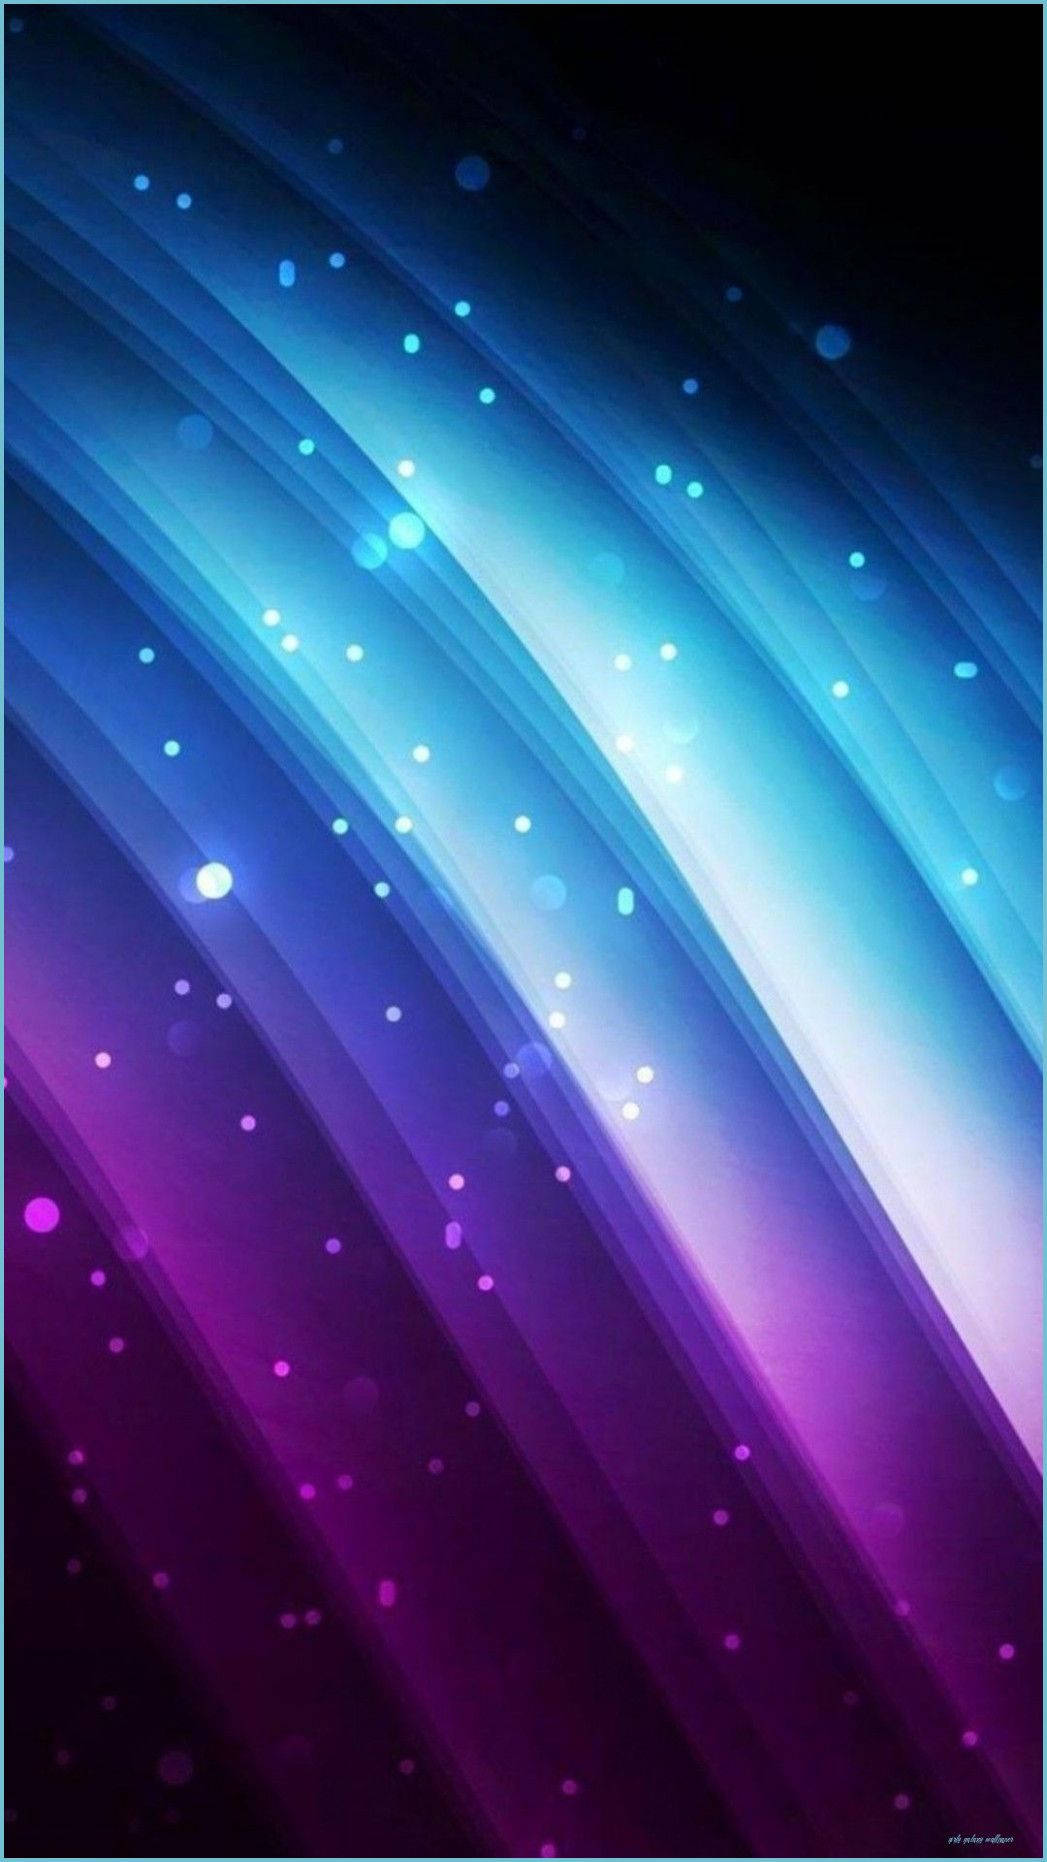 A Purple And Blue Background With Stars Wallpaper